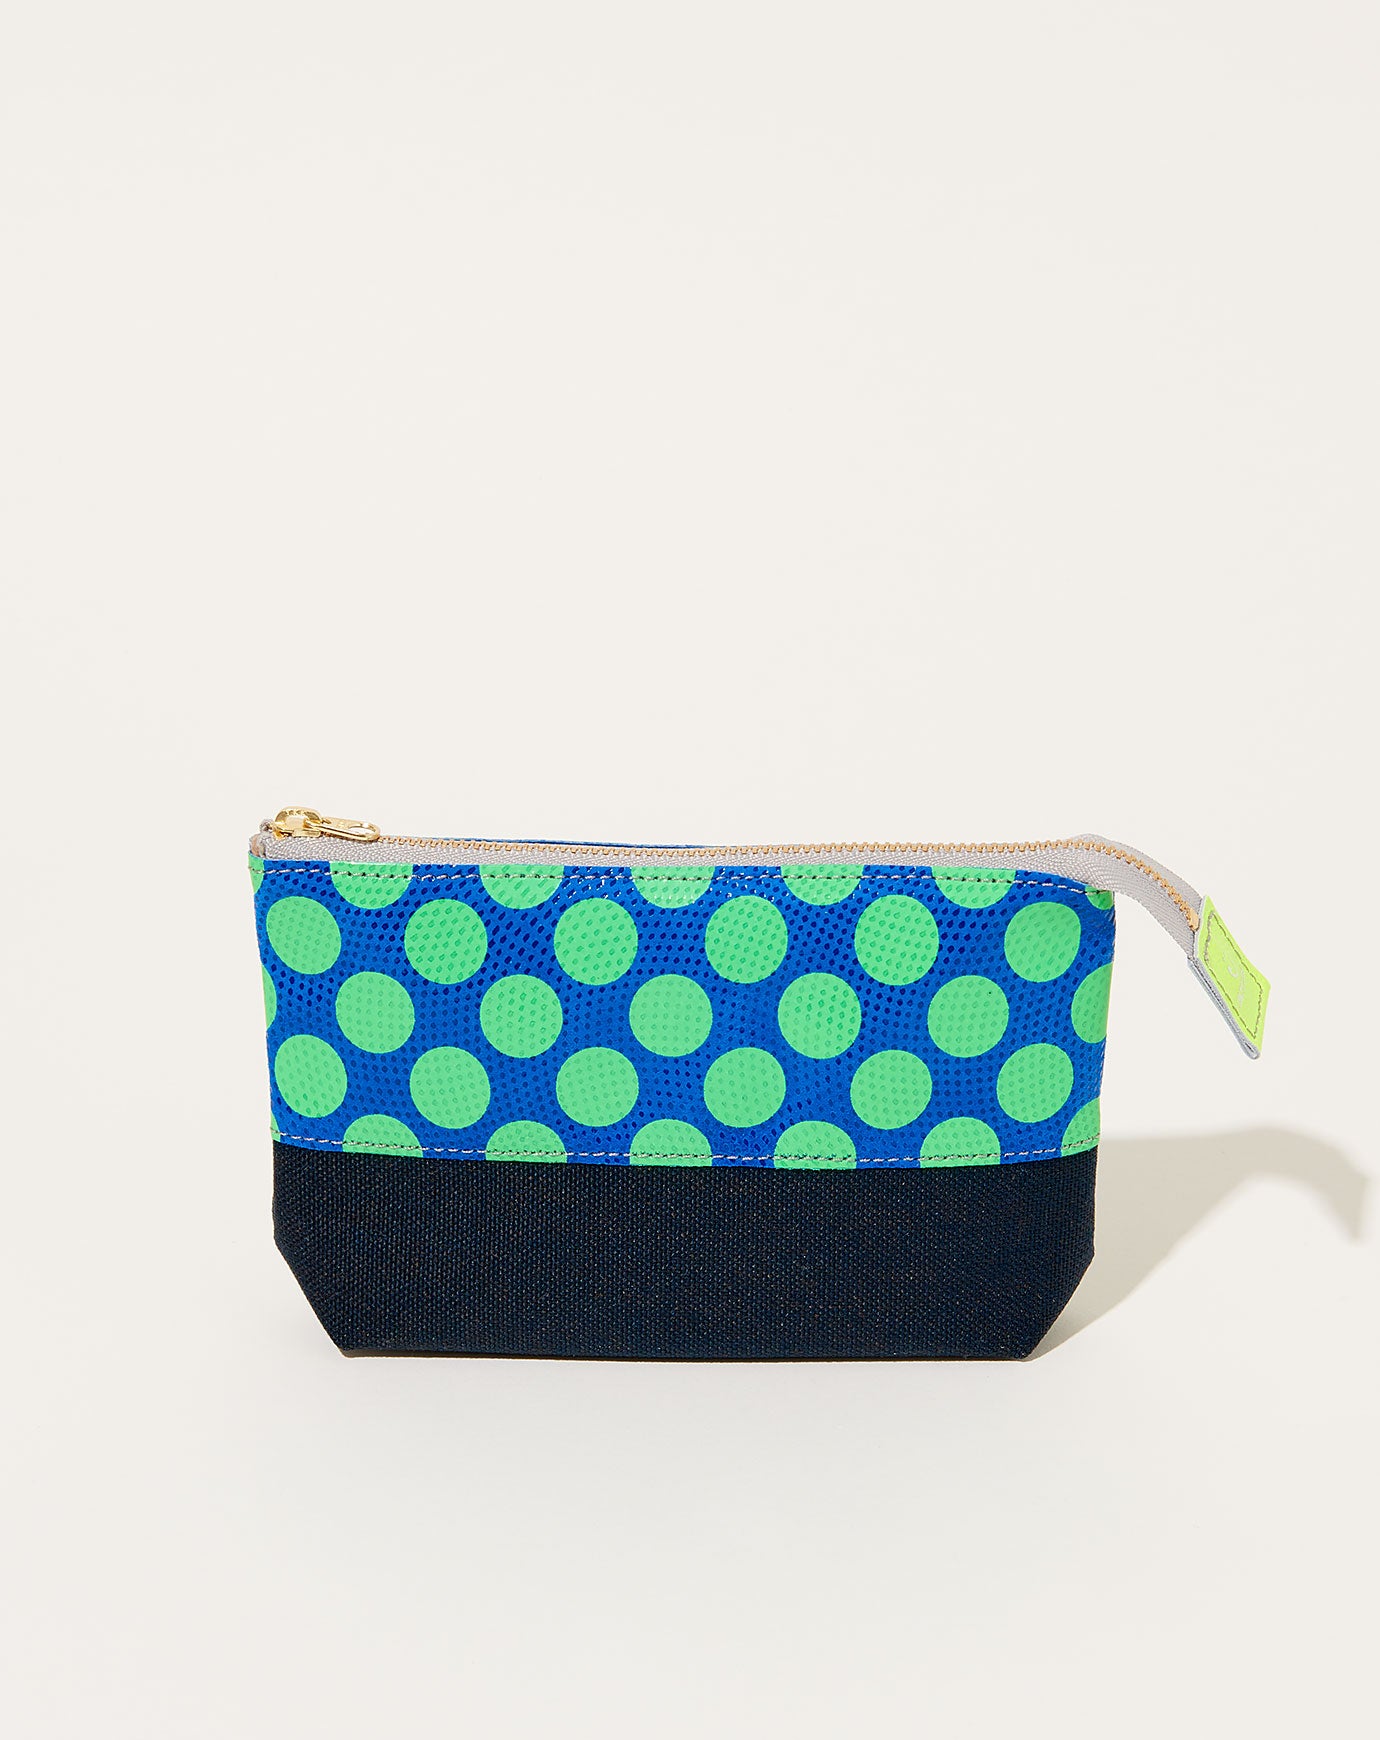 Carmine Ecology Leather Pouch in Neon Green